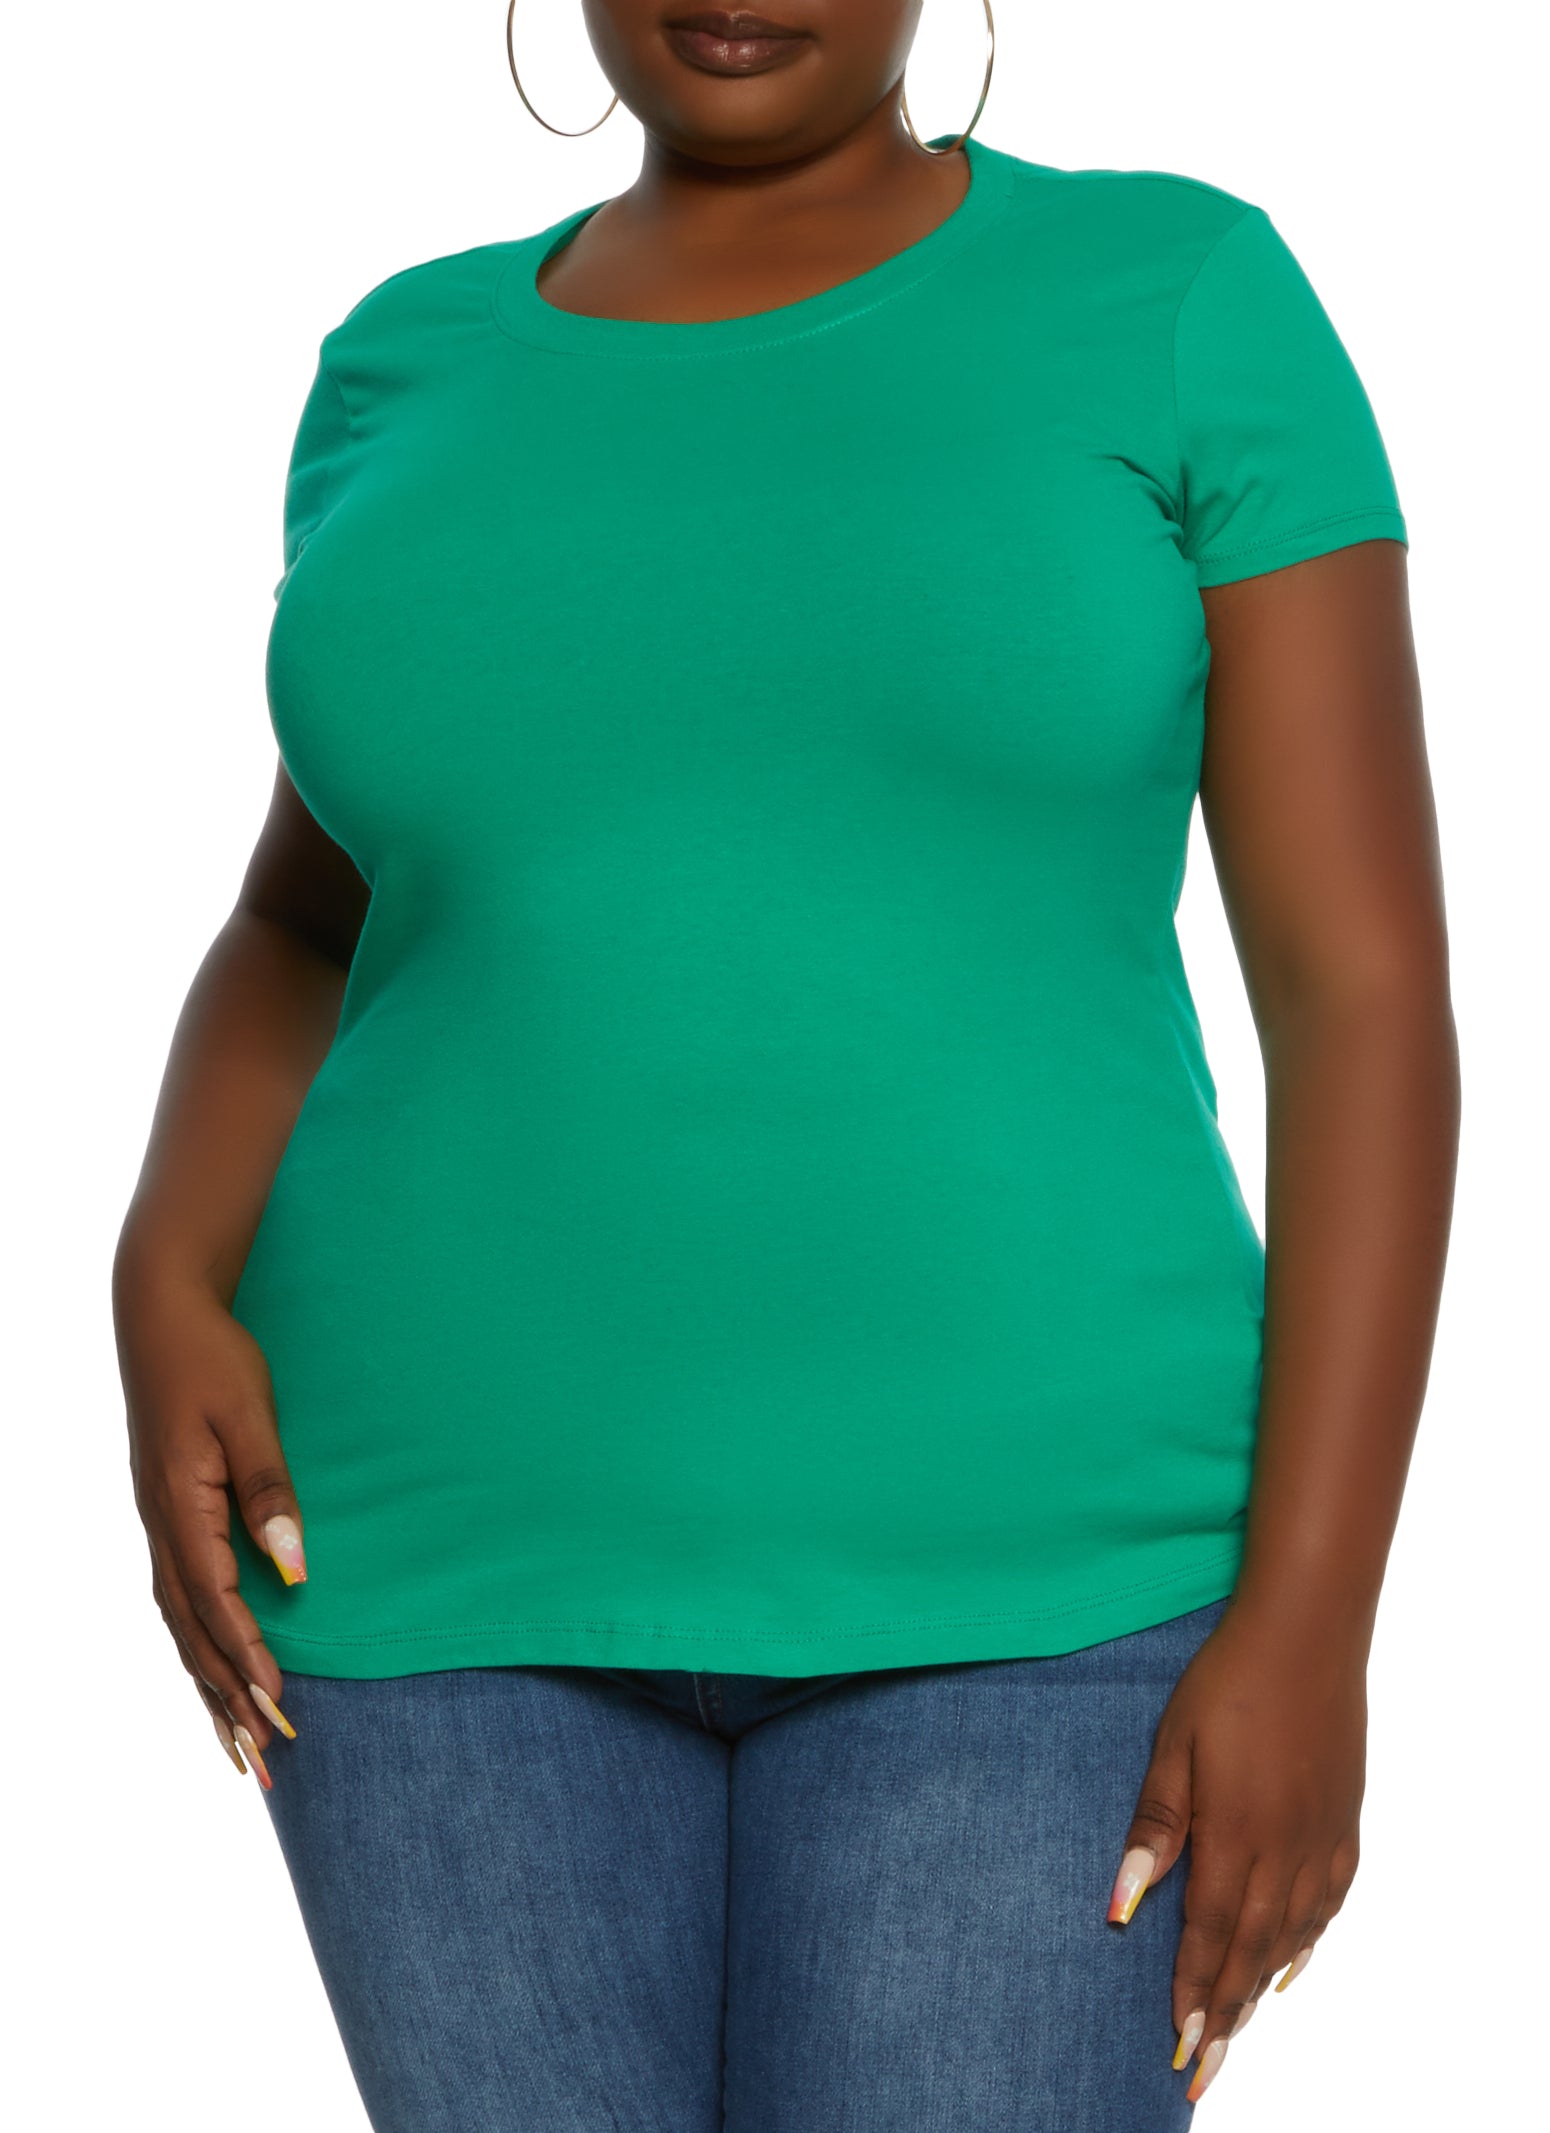 Plus Size Green Tops, Everyday Low Prices